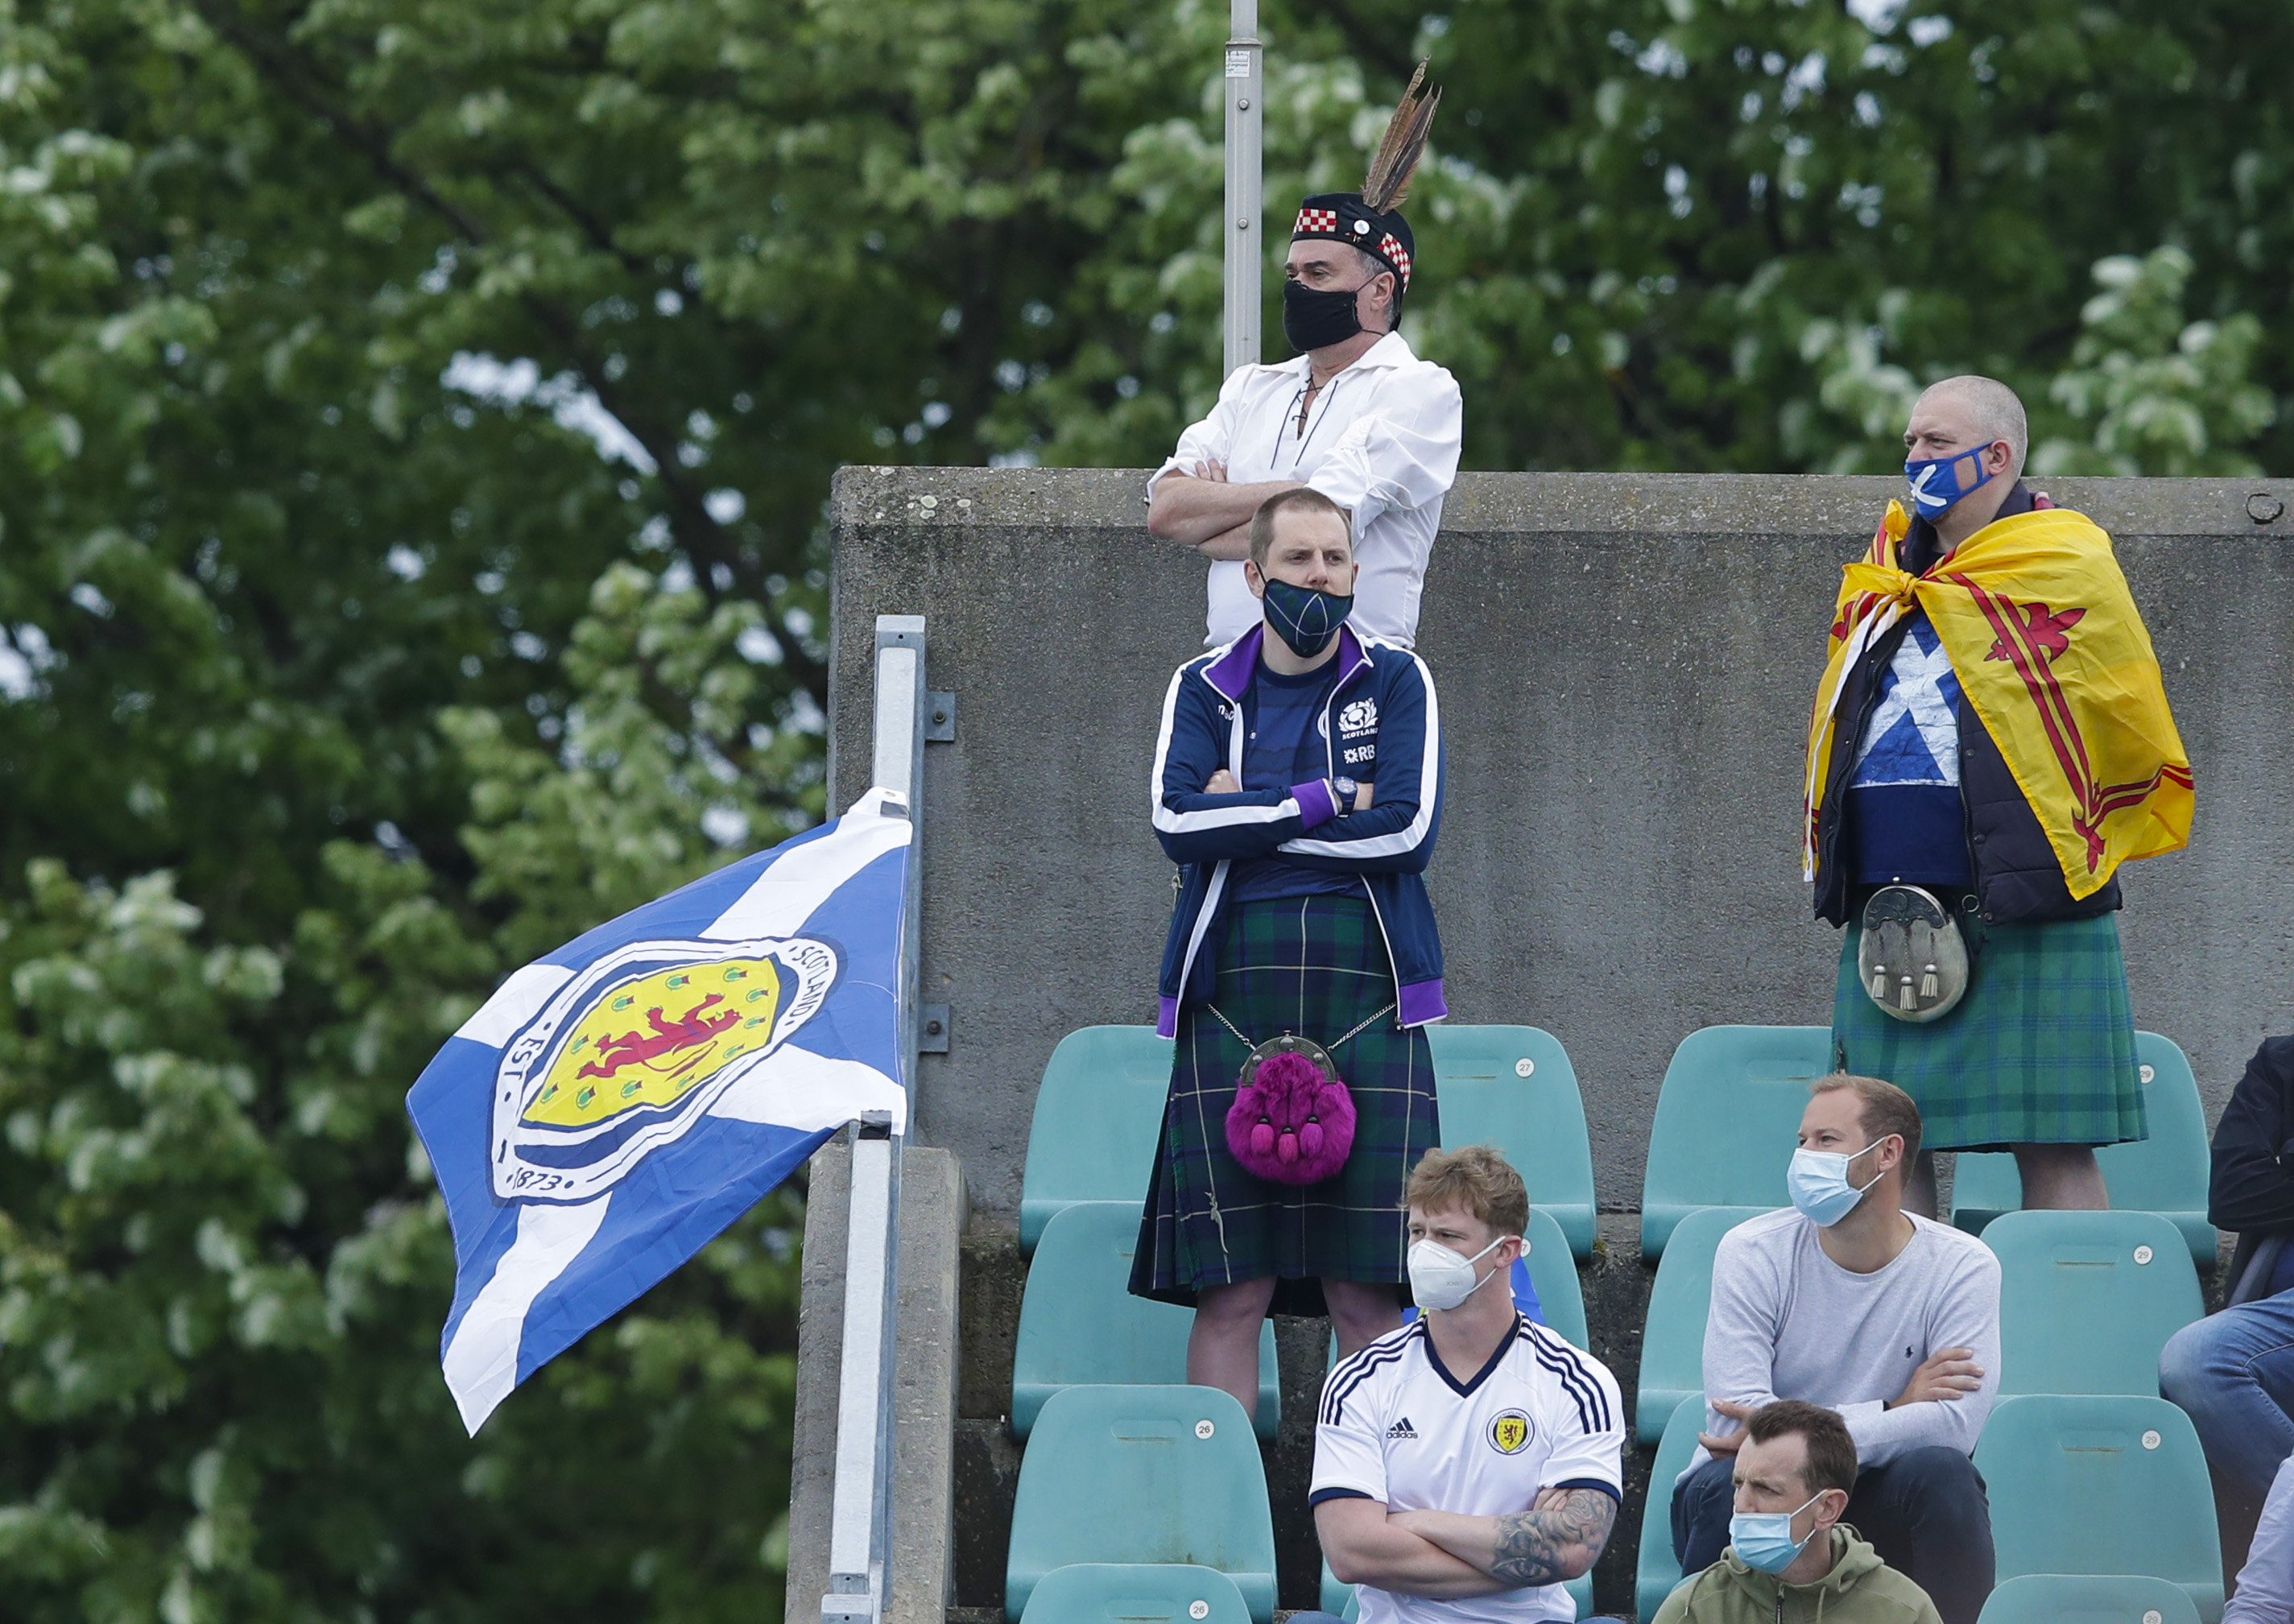 Some members of the Tartan Army made it into the stadium.